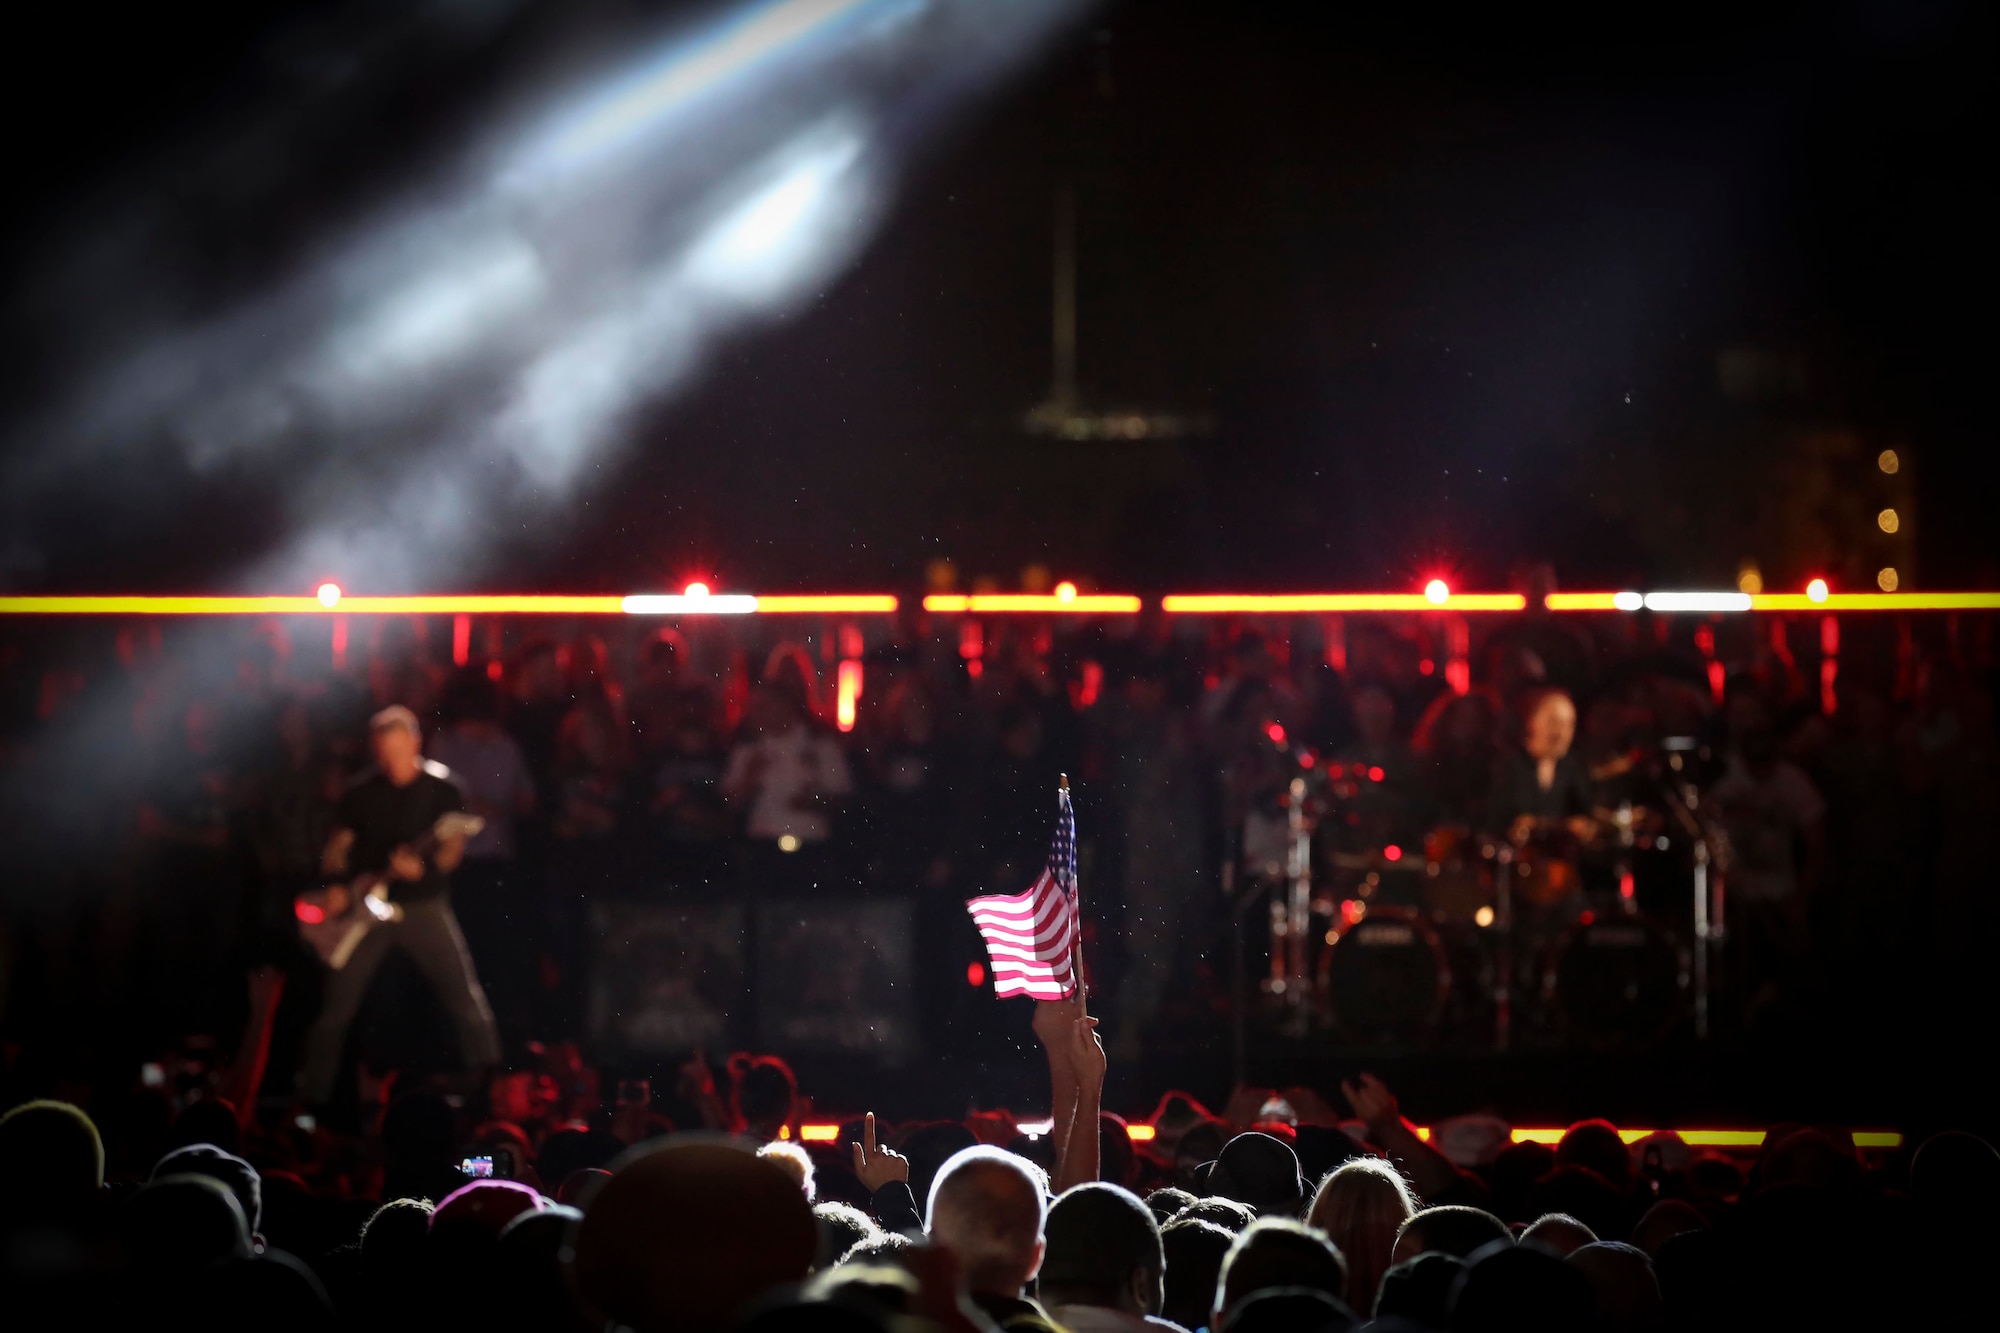 A miniature American flag catches the spotlight during Metallica's performance at "The Concert for Valor" on The National Mall, Tuesday, Nov. 11, 2014. (U.S. Air National Guard photo by 1st Lt. Nathan Wallin)